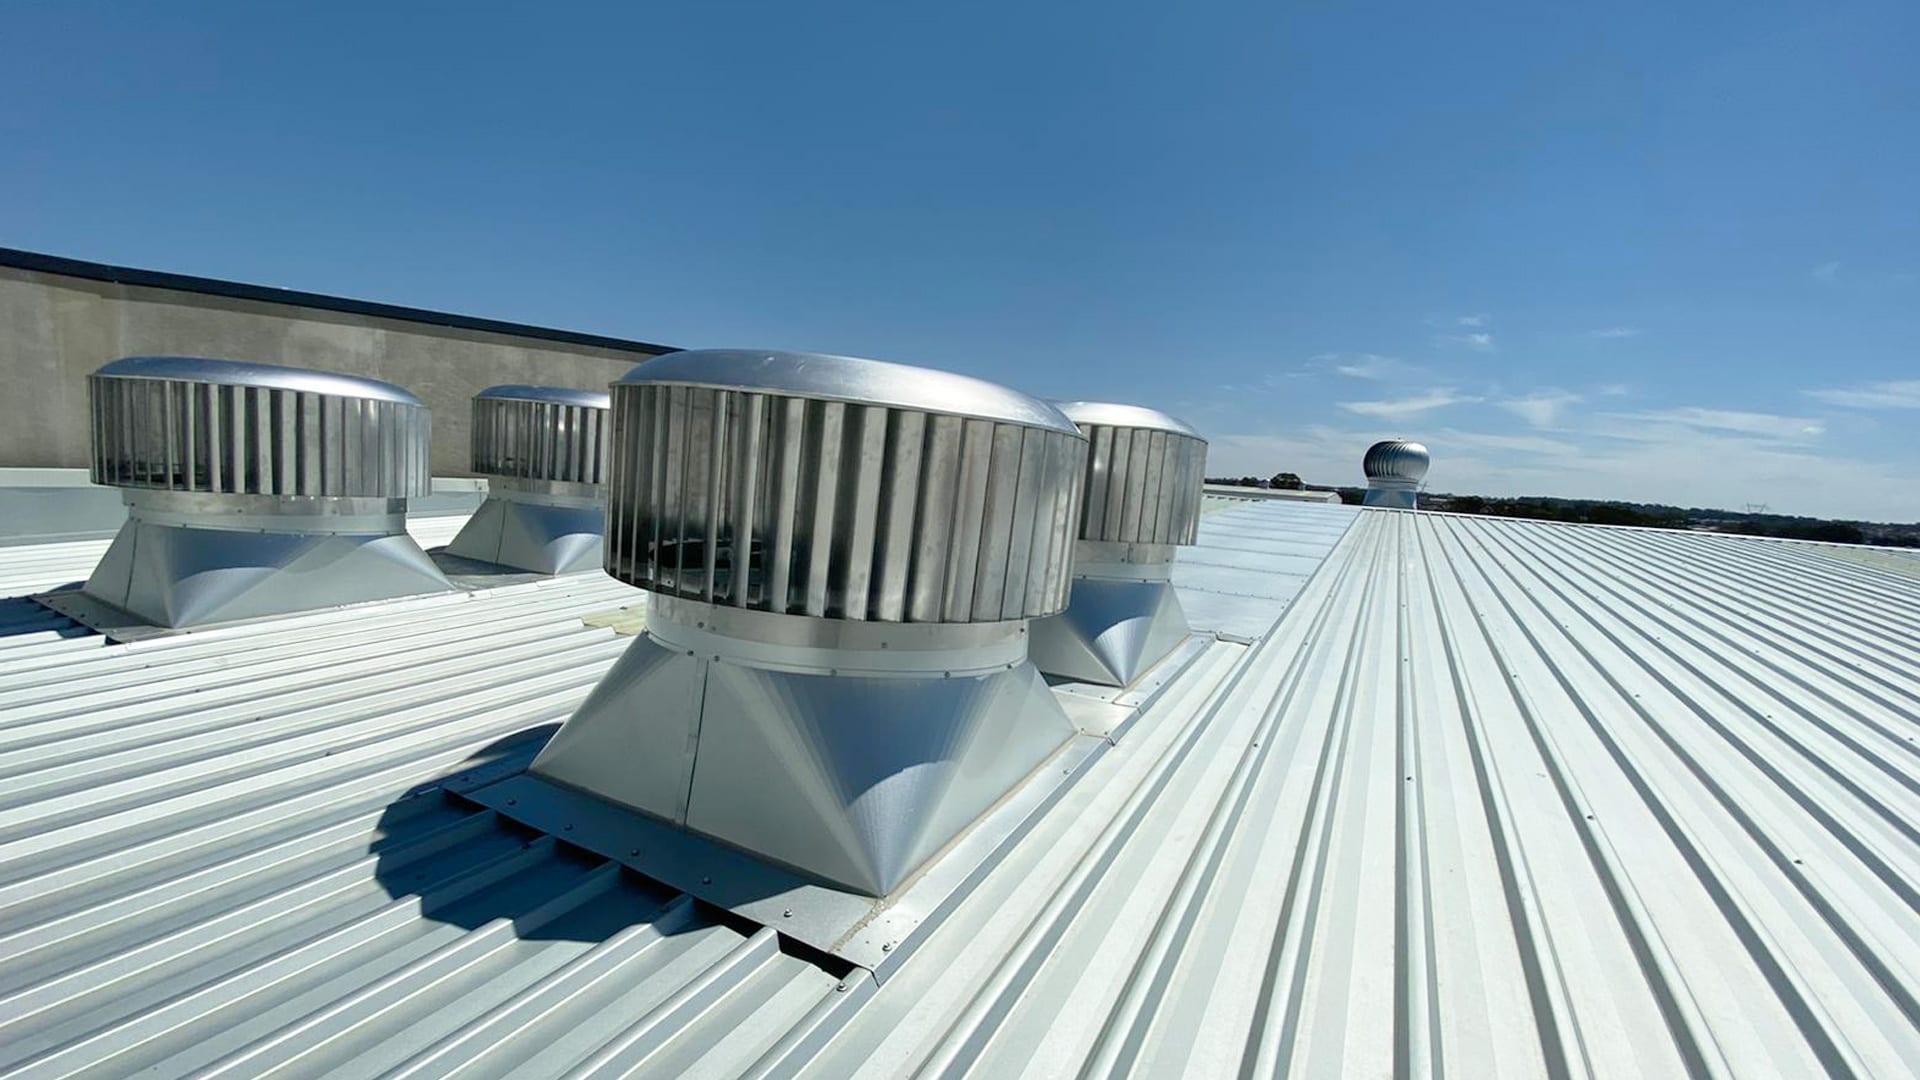 4 Ampelite Rotary roof Vents Commercial Roof